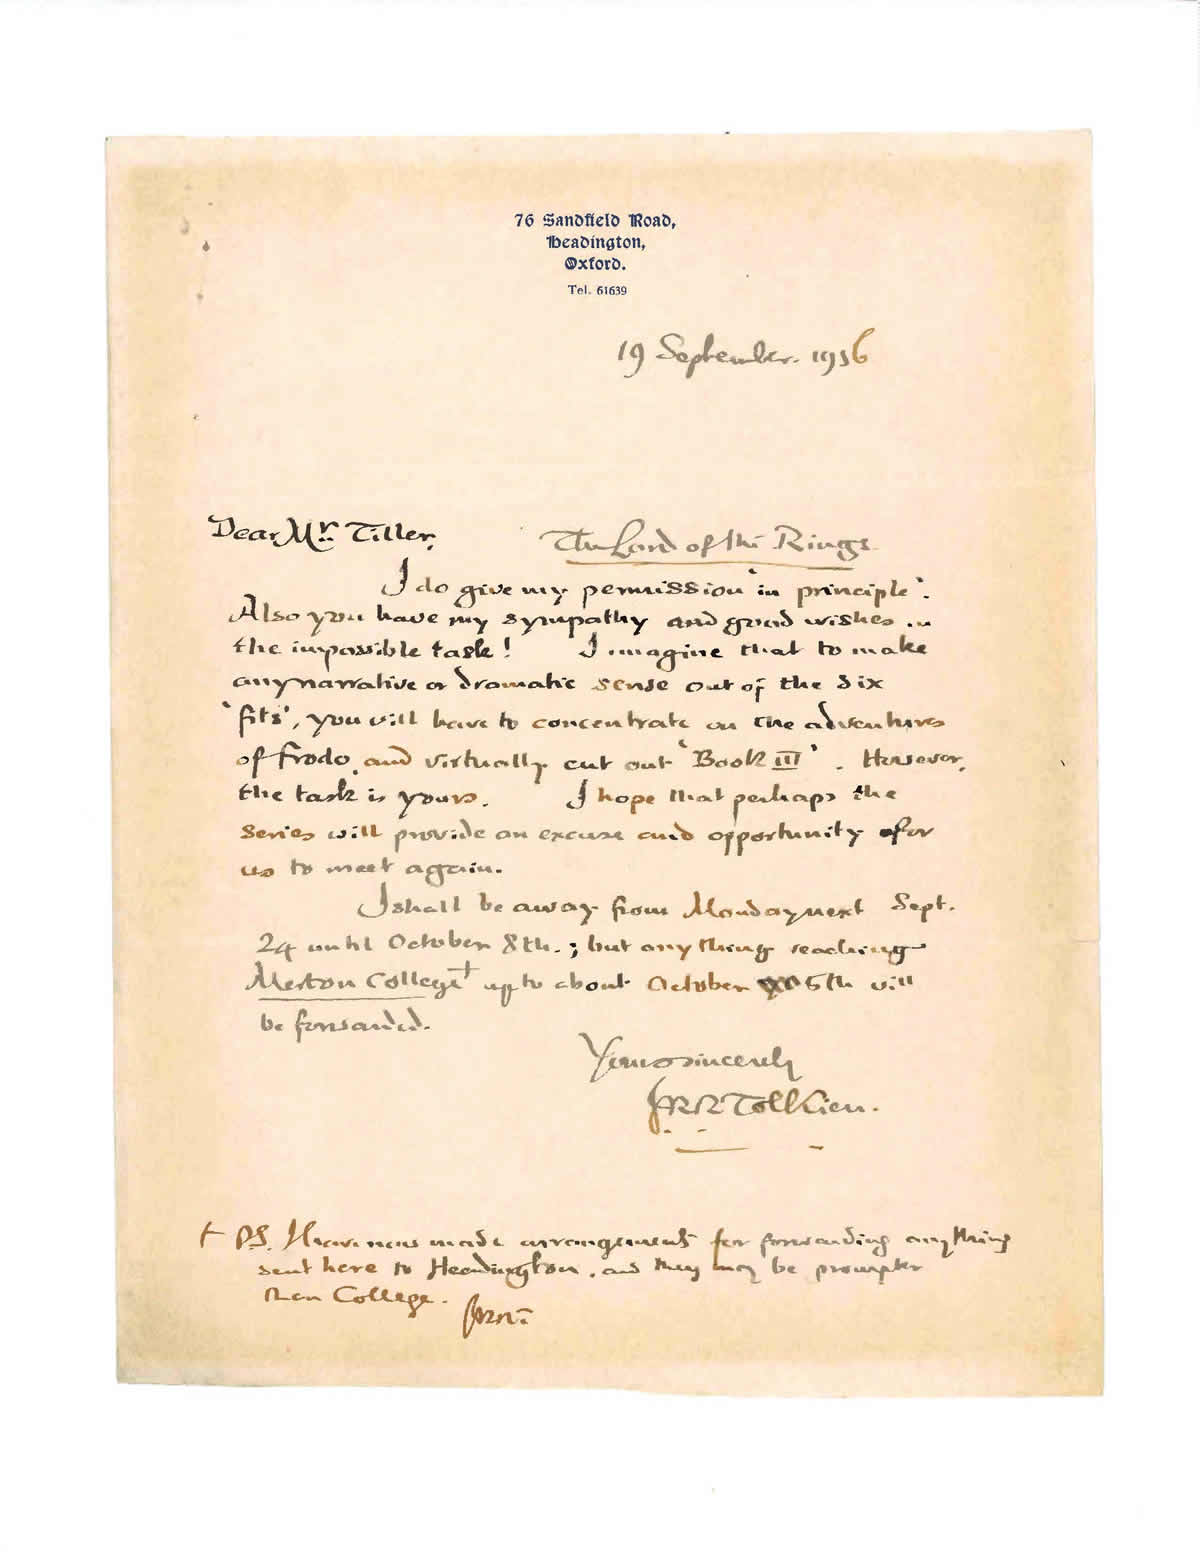 A one page handwritten letter signed J.R.R. Tolkien to BBC Radio Producer Terence Tiller